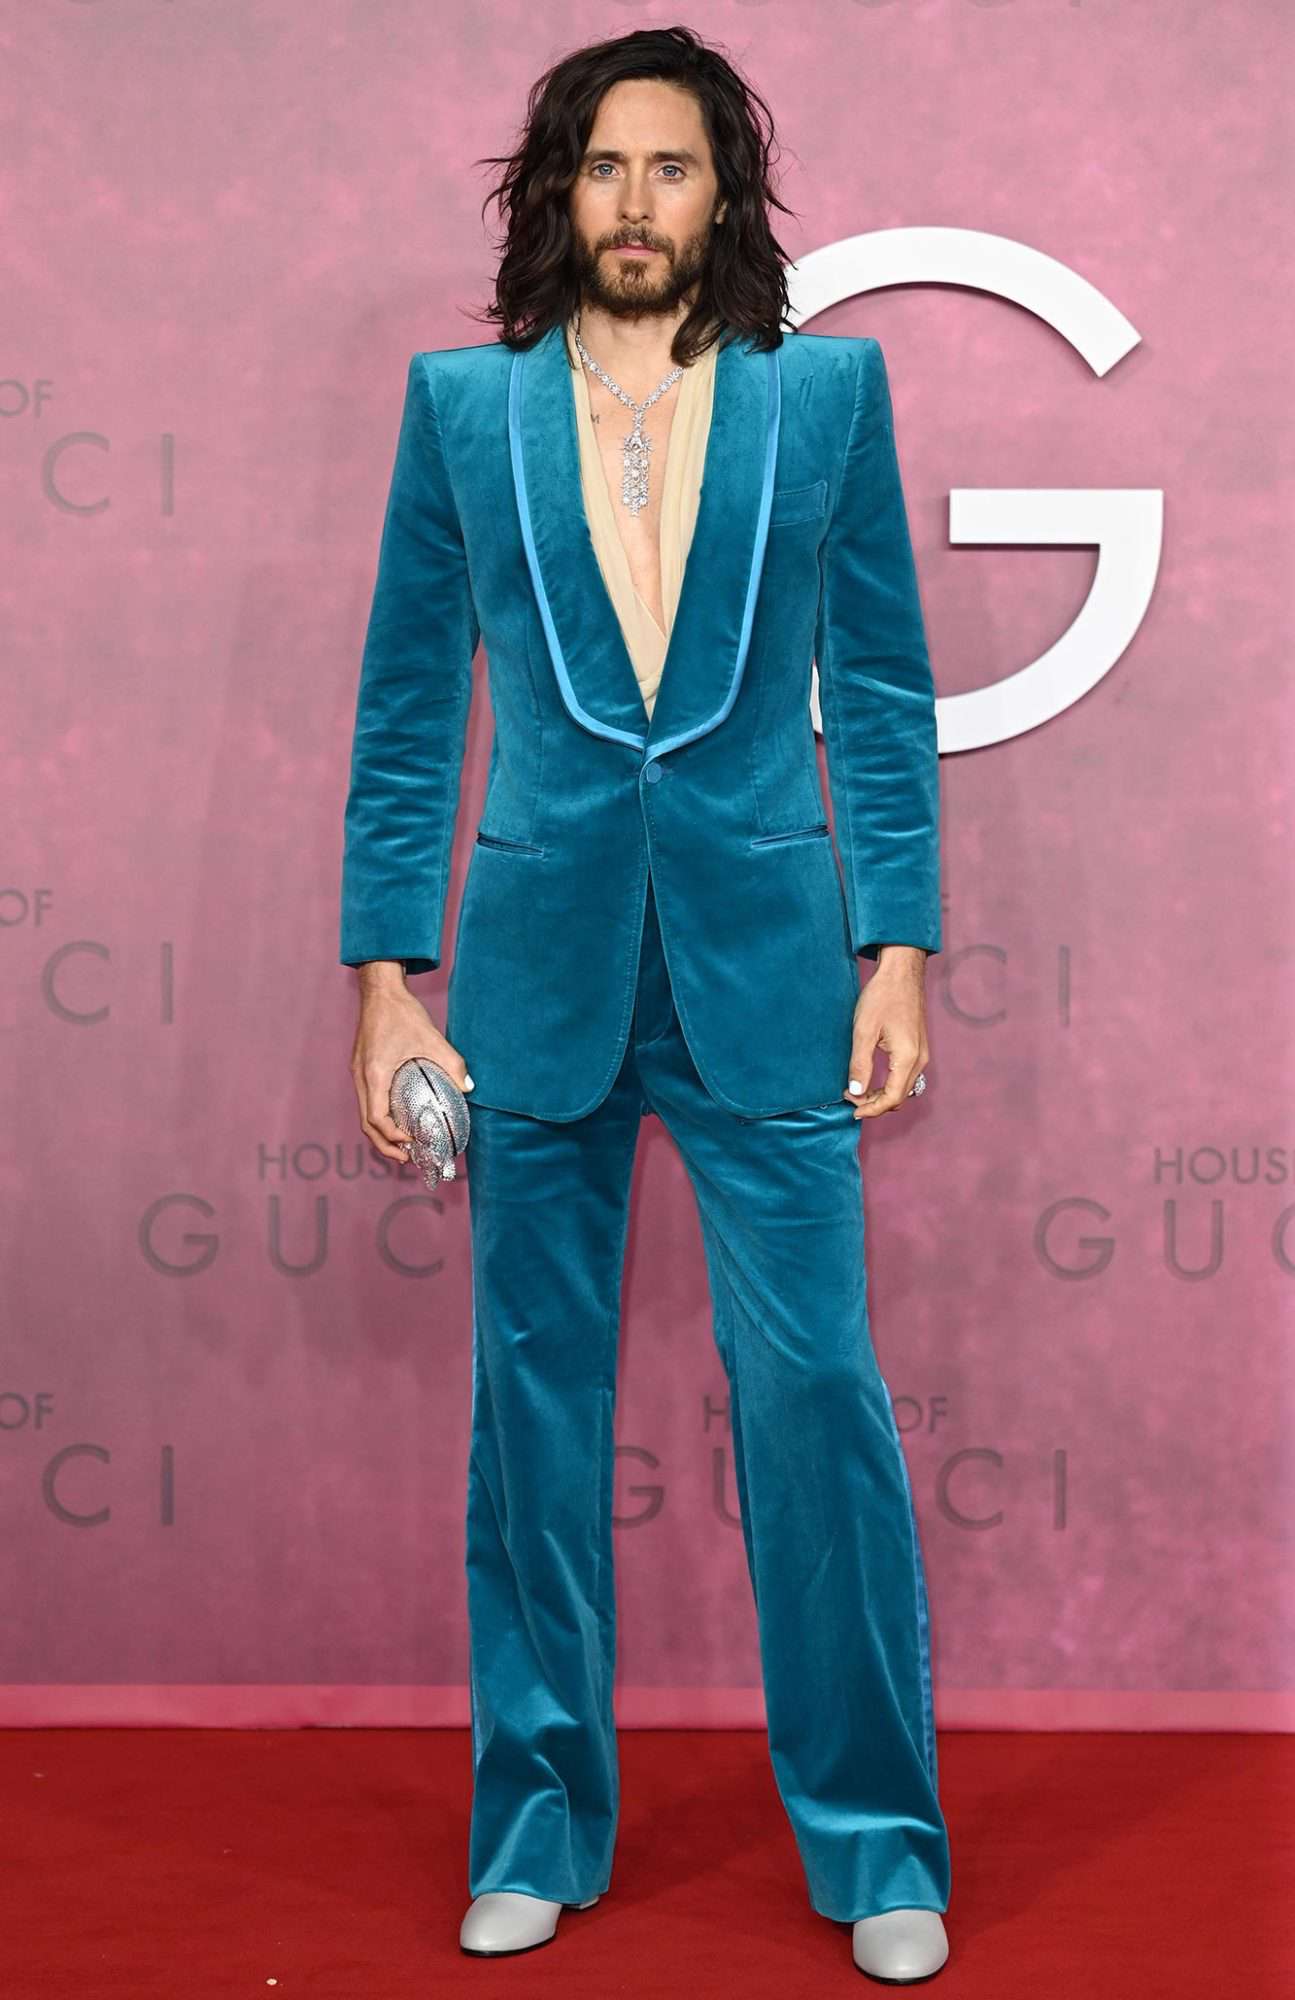 Jared Leto turns up in turquoise